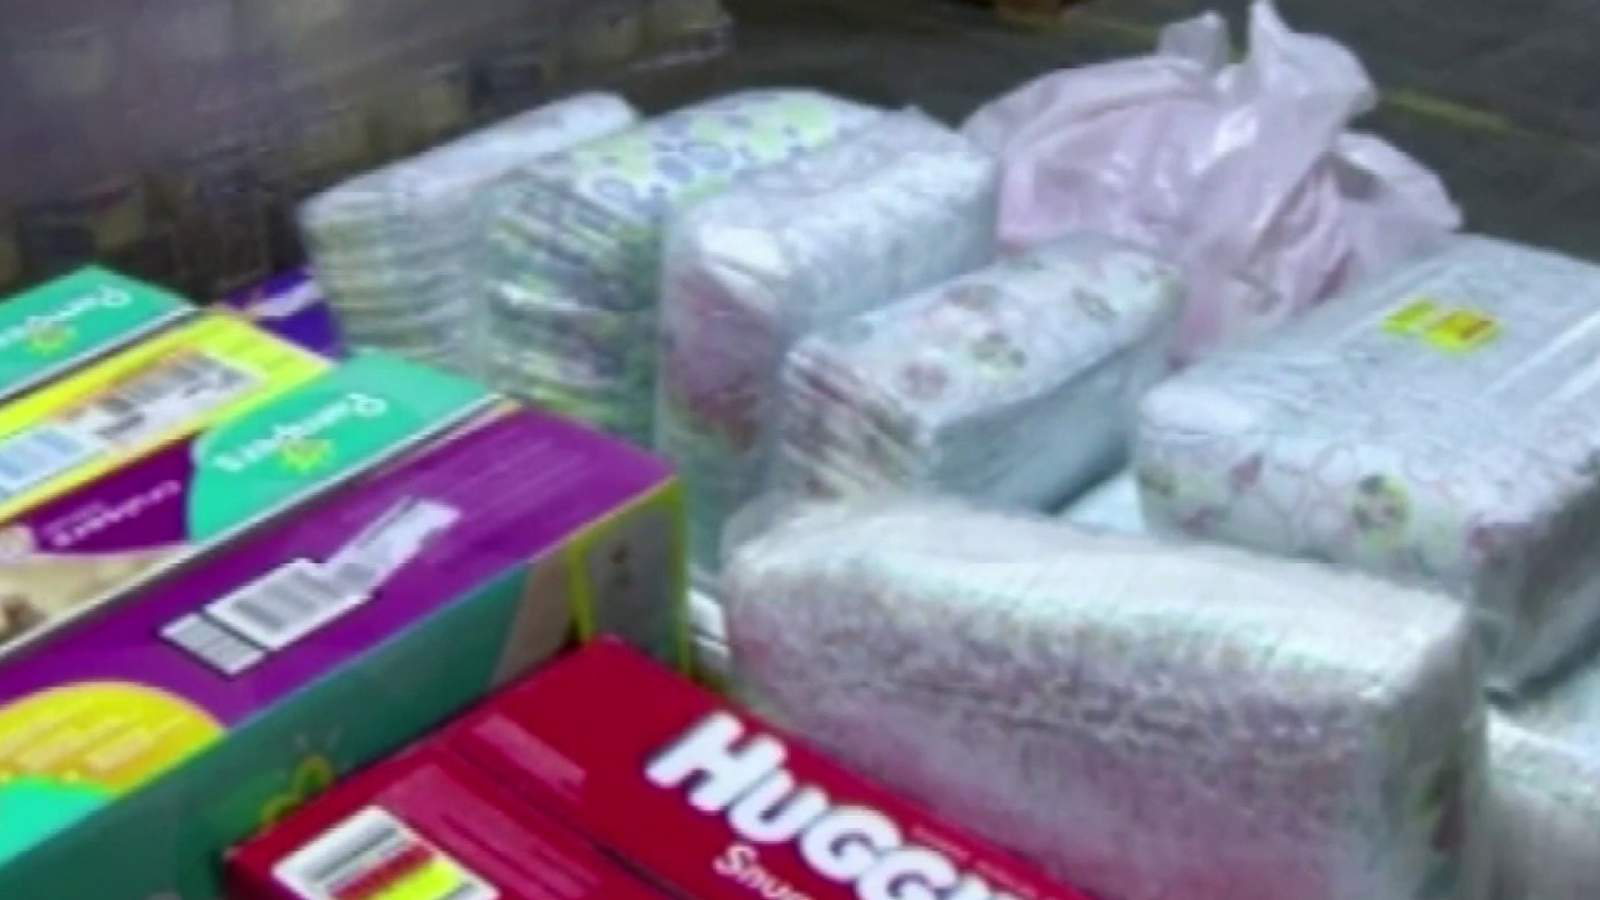 Lower taxes on diapers, tampons part of Jan. 1 tax changes